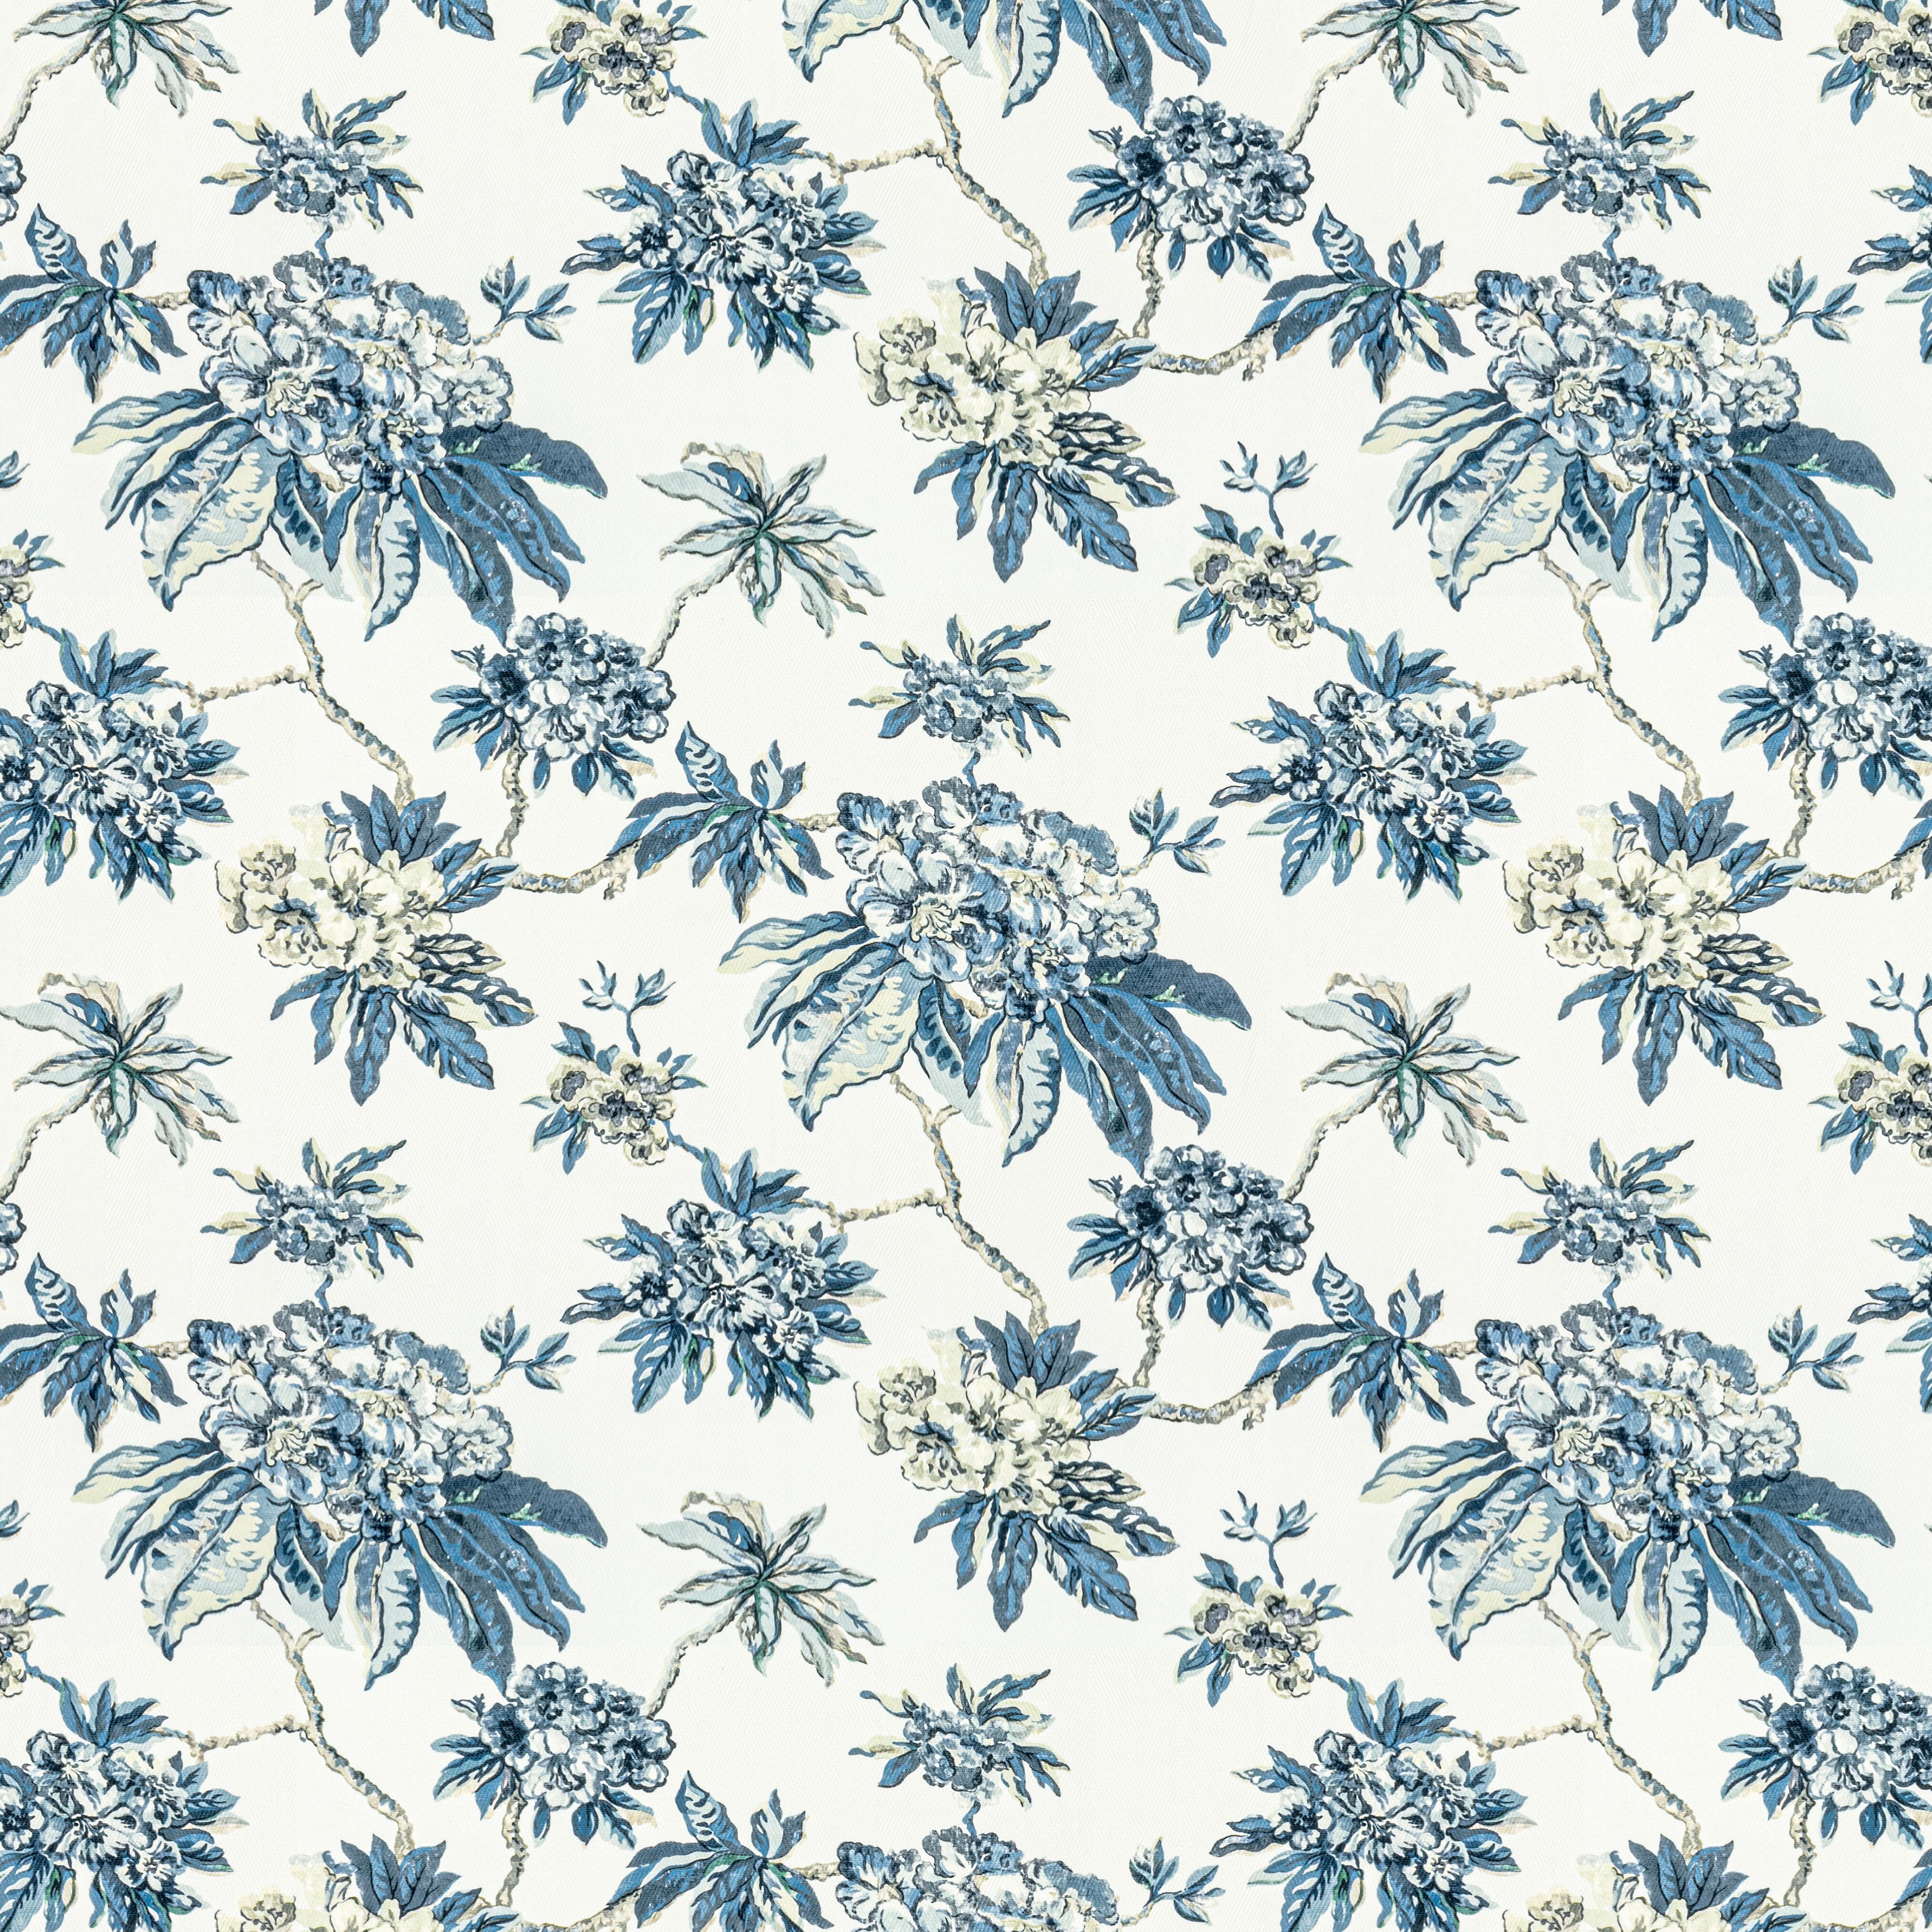 7811-44 Wilton Breakers by Stout Fabric